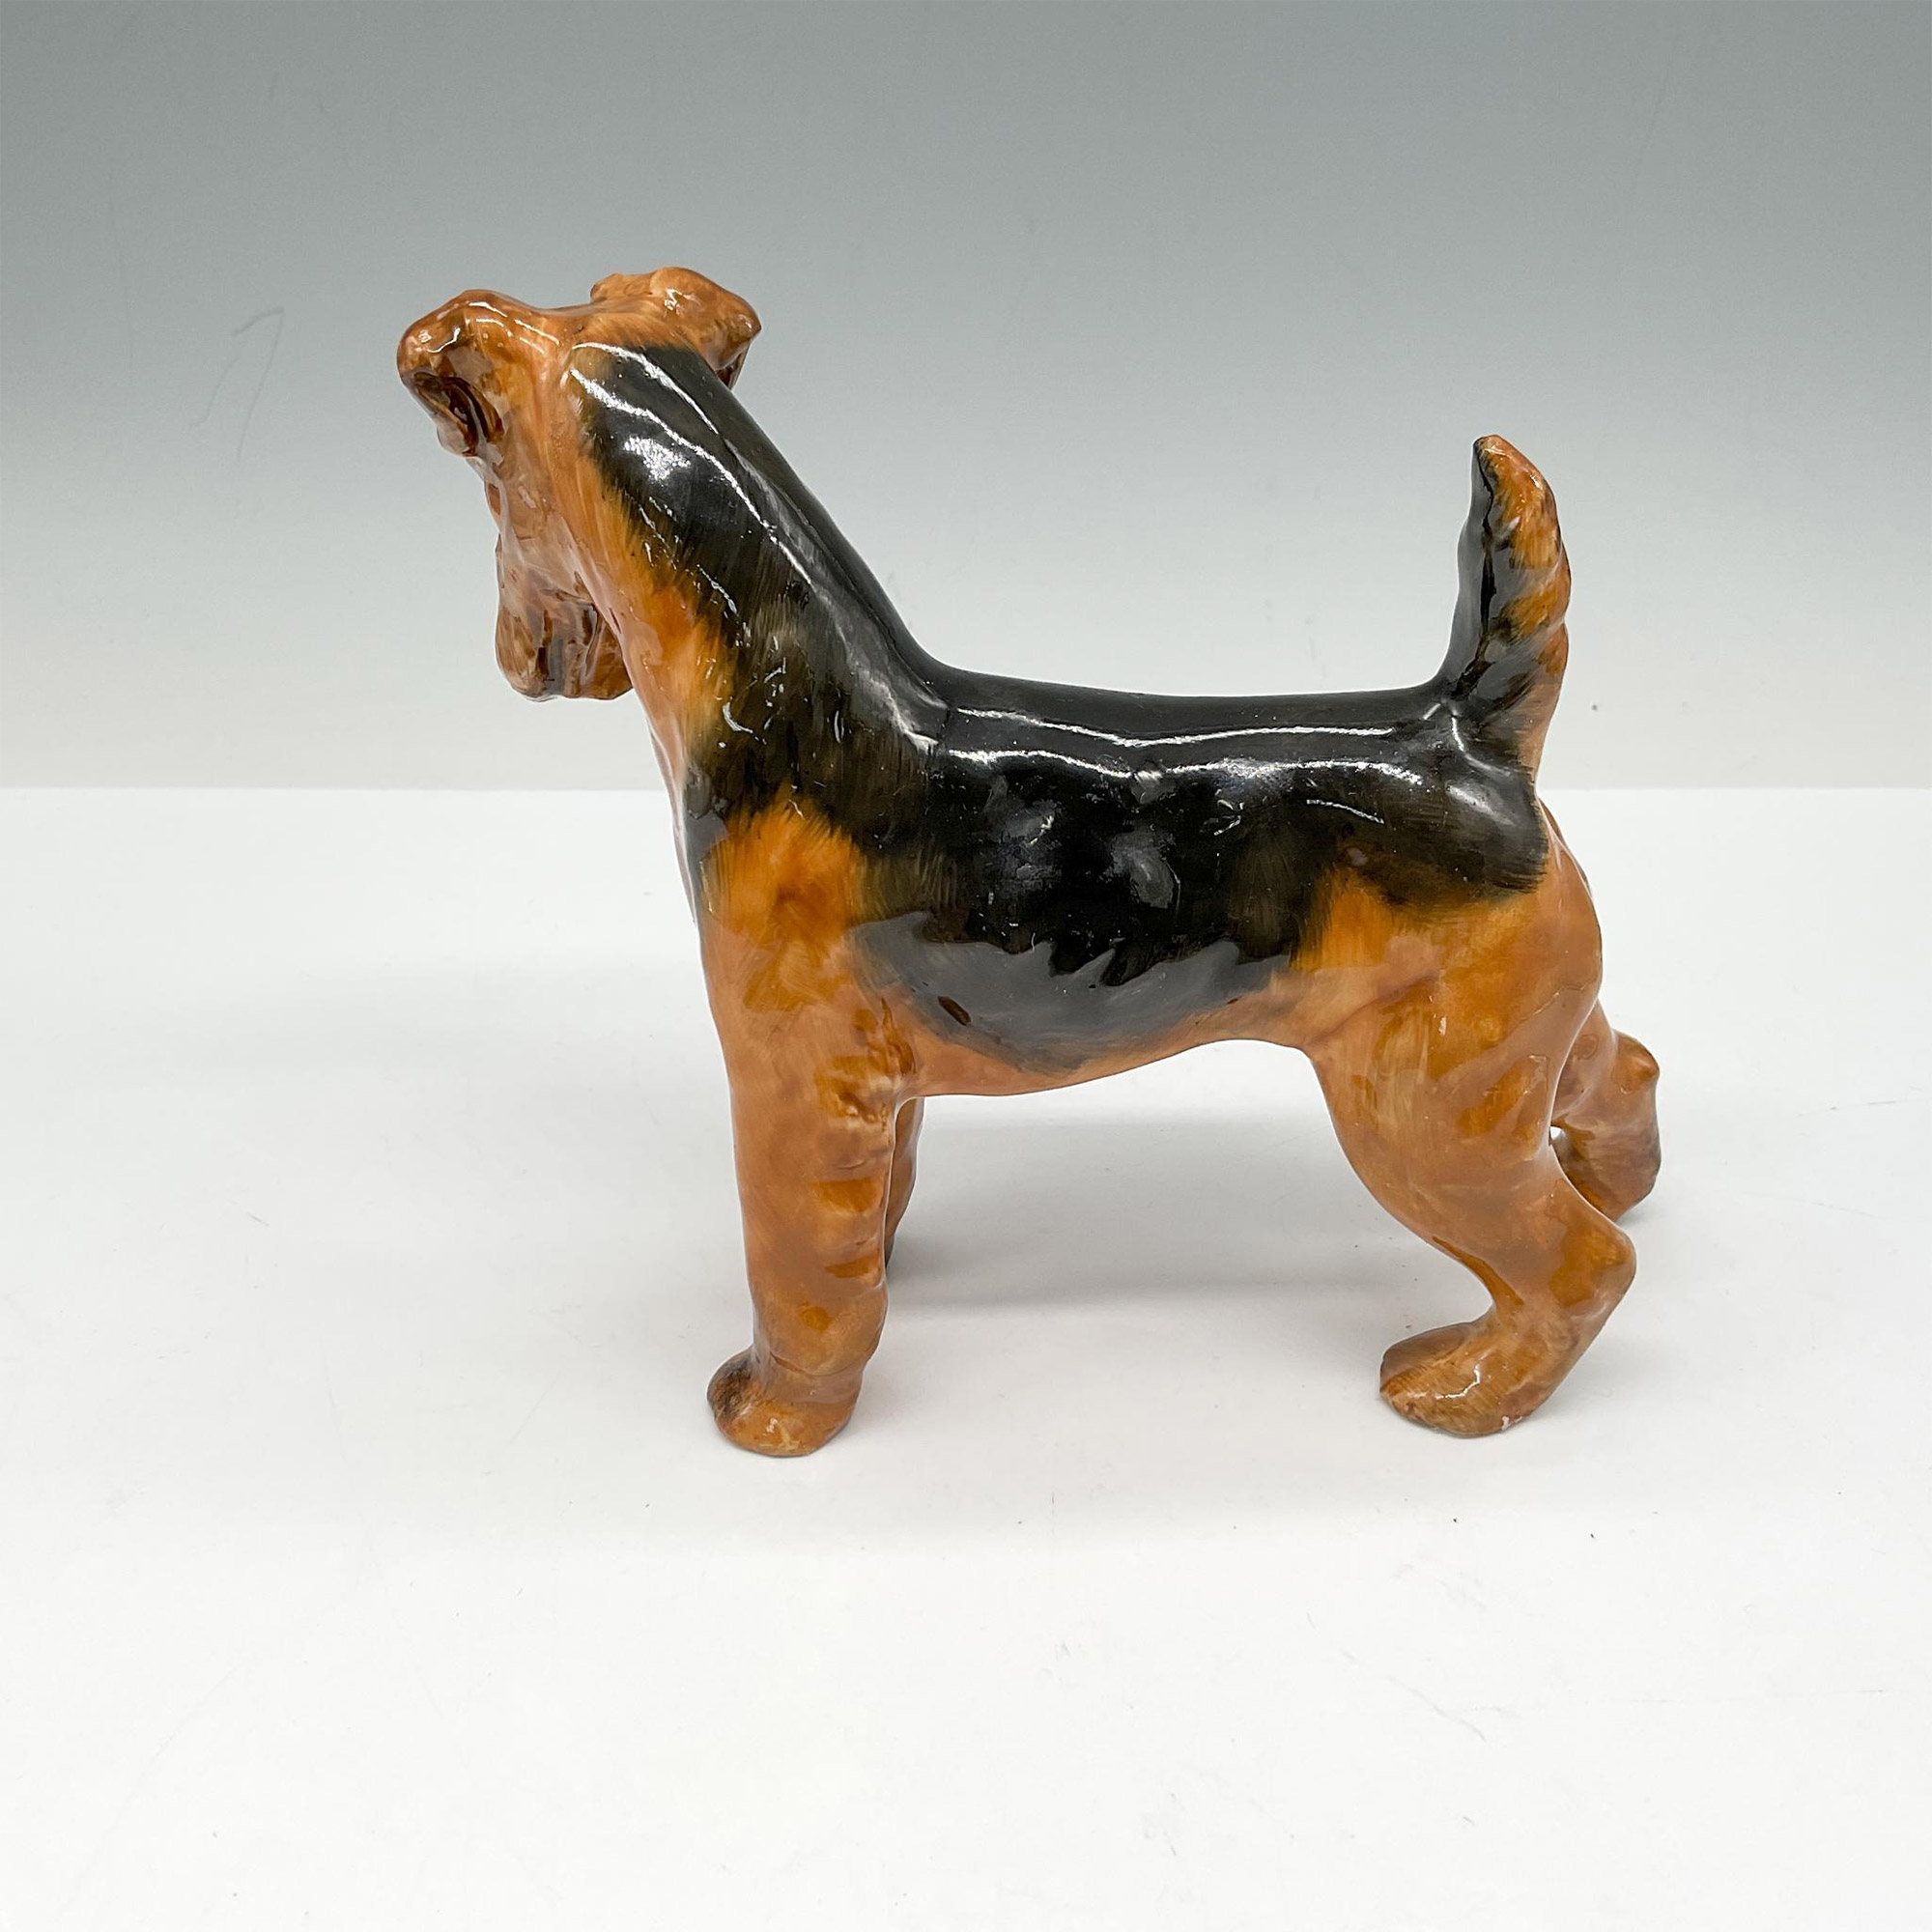 Airedale Terrier - Royal Doulton Animal Figurine - Image 2 of 3